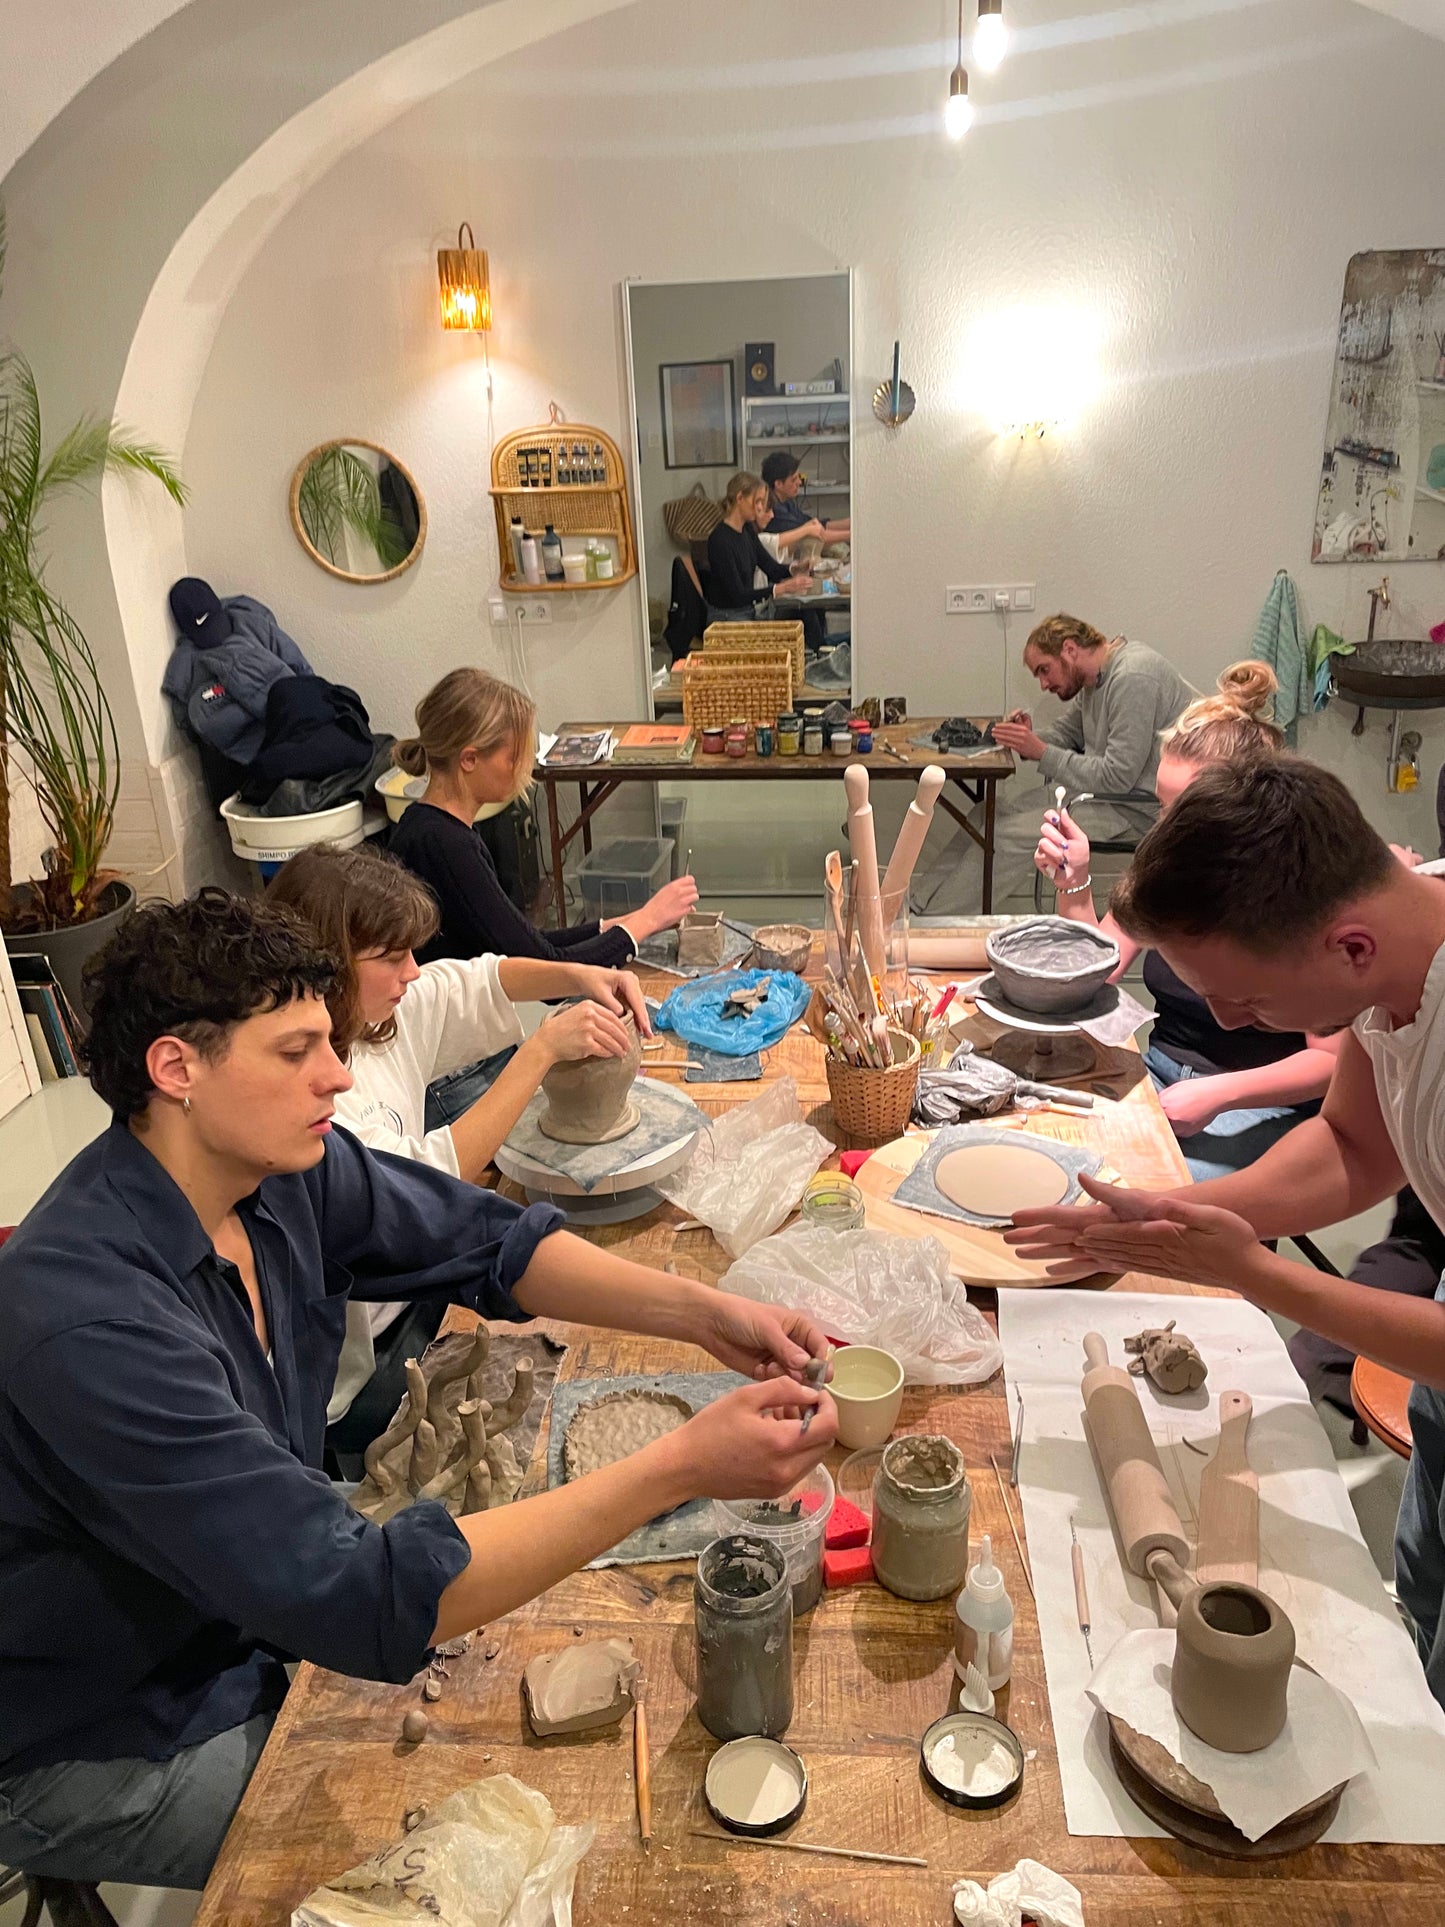 Ceramic Workshop "Freehand and Wheel Pottery" with Brigitta in Budapest, Hungary